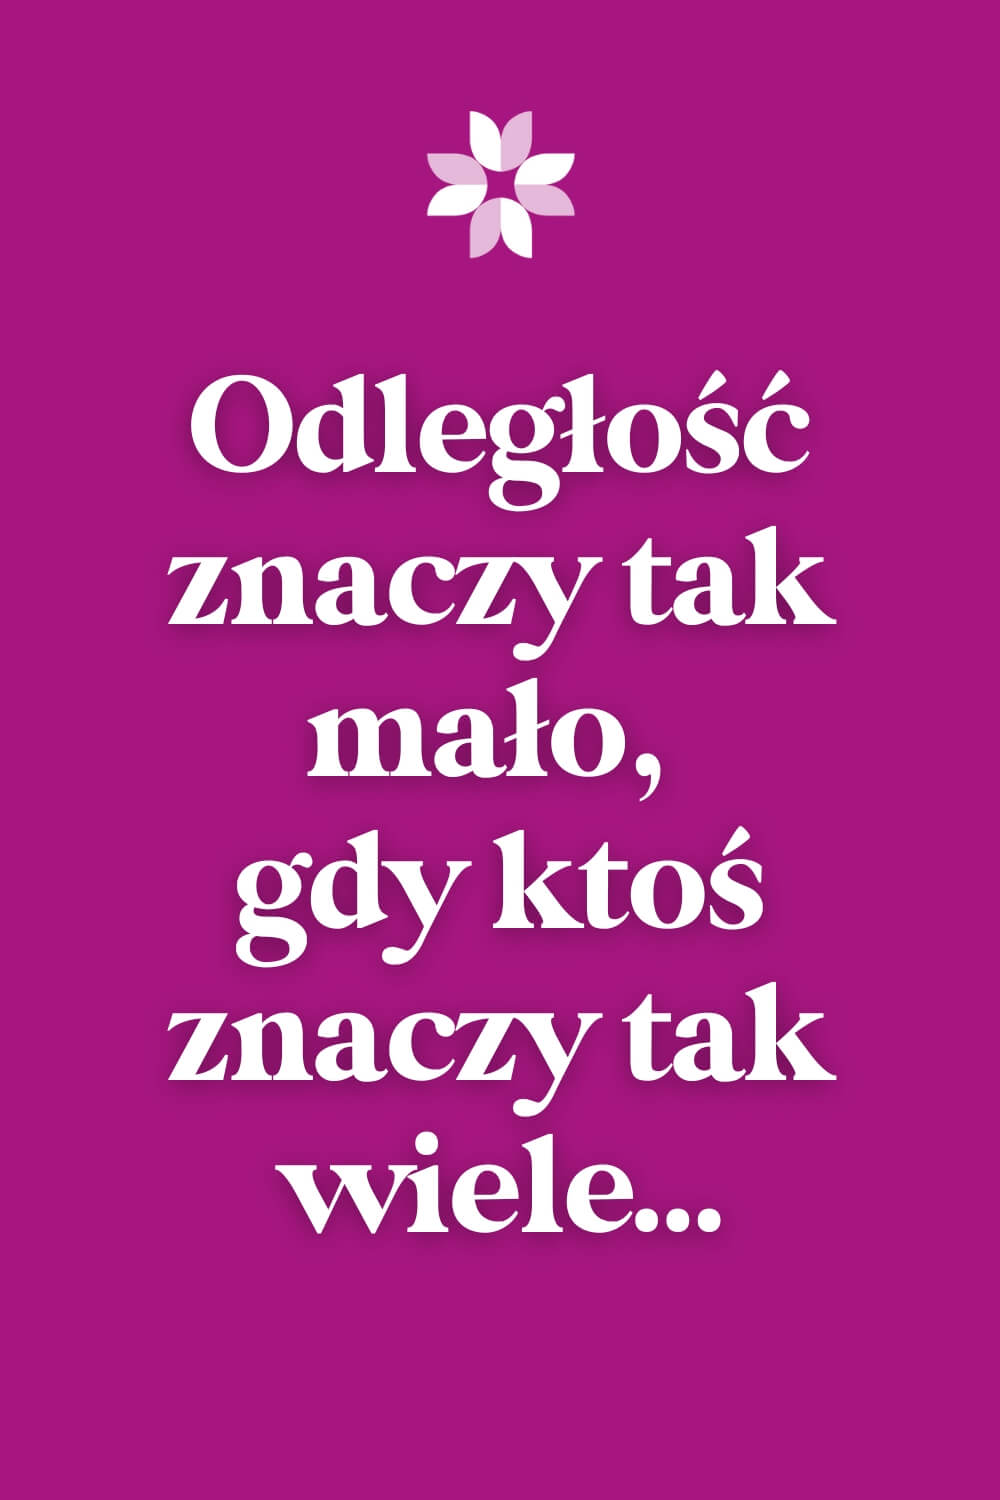 Best love quotes in Polish (Valentine's Day messages)